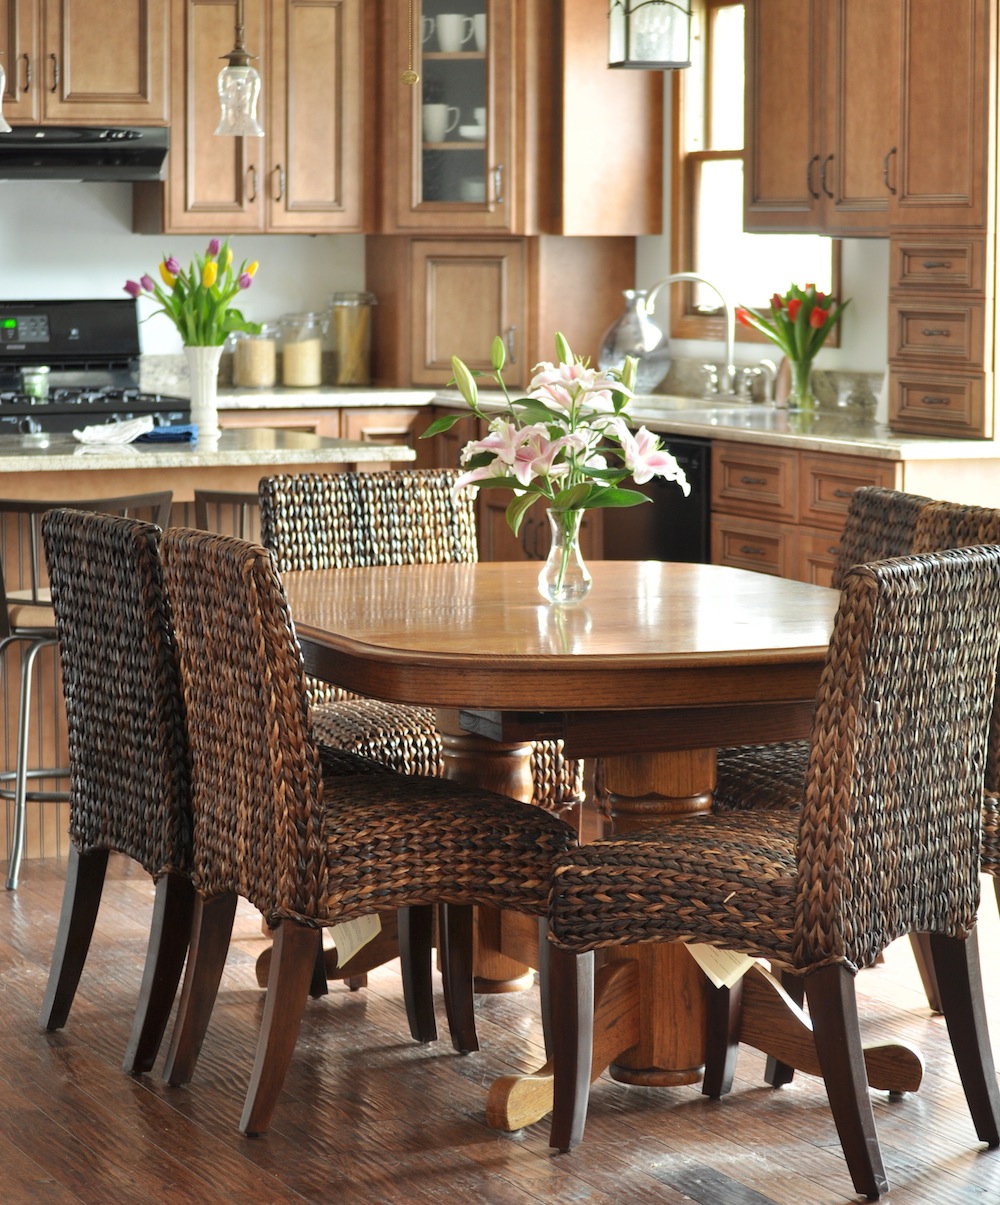 Kitchen Refresh Featuring Pottery Barn’s Seagrass Chairs 